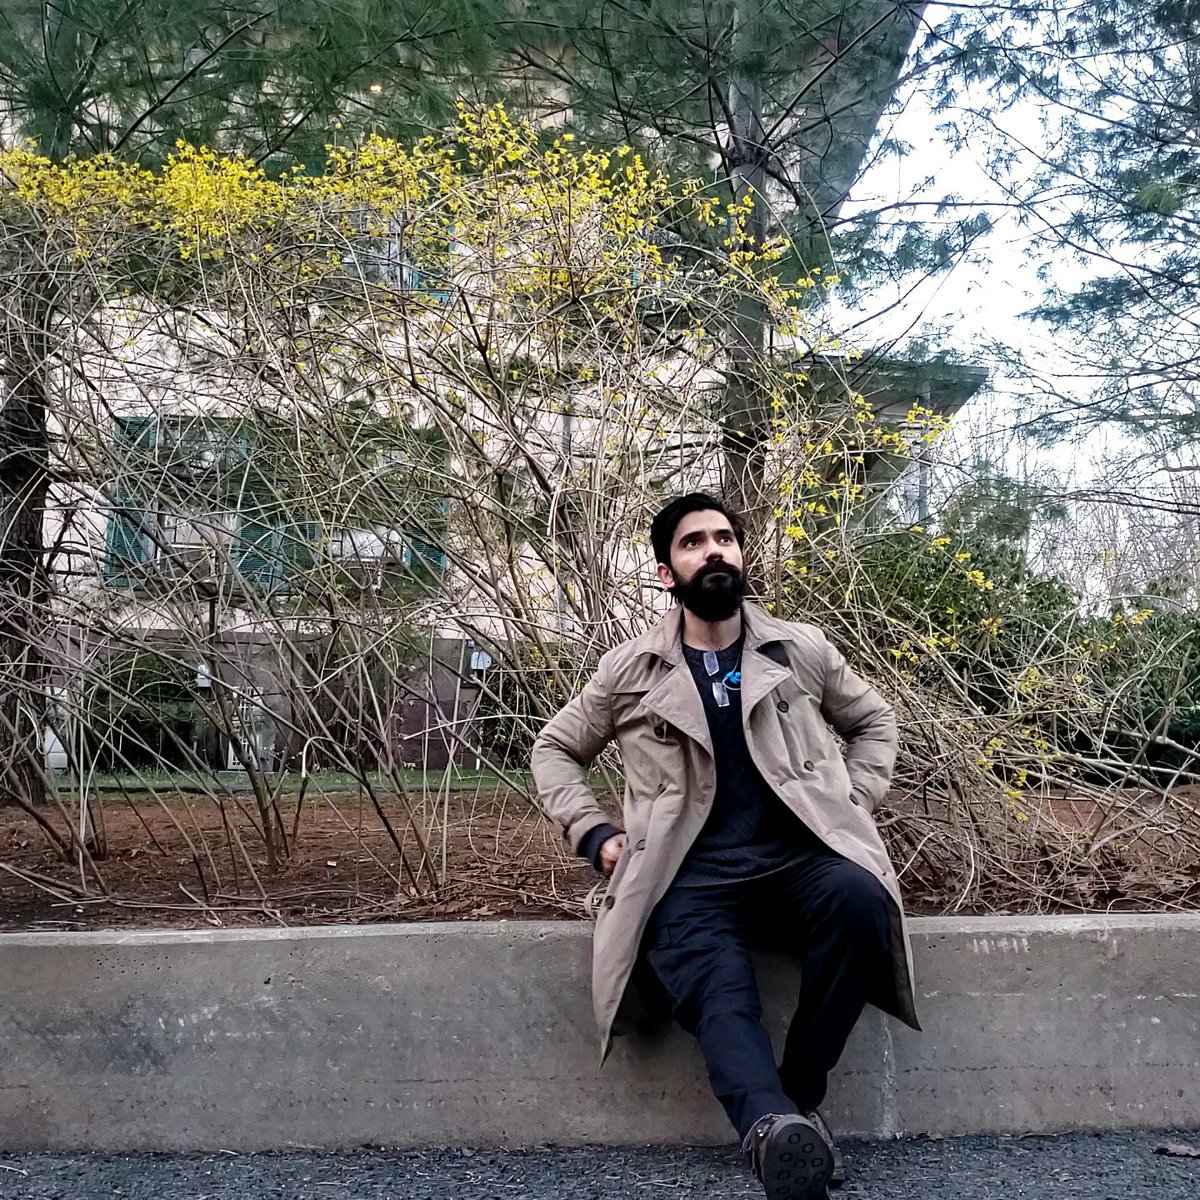 Please welcome @usmanfarooq201, this week's #TraineeTuesday star! This @Yale_INP alum and current postdoc in the @GeorgeDragoi2 lab studies the hippocampus & memory. Let's learn more about his research journey! ⬇️🧵[1/5]